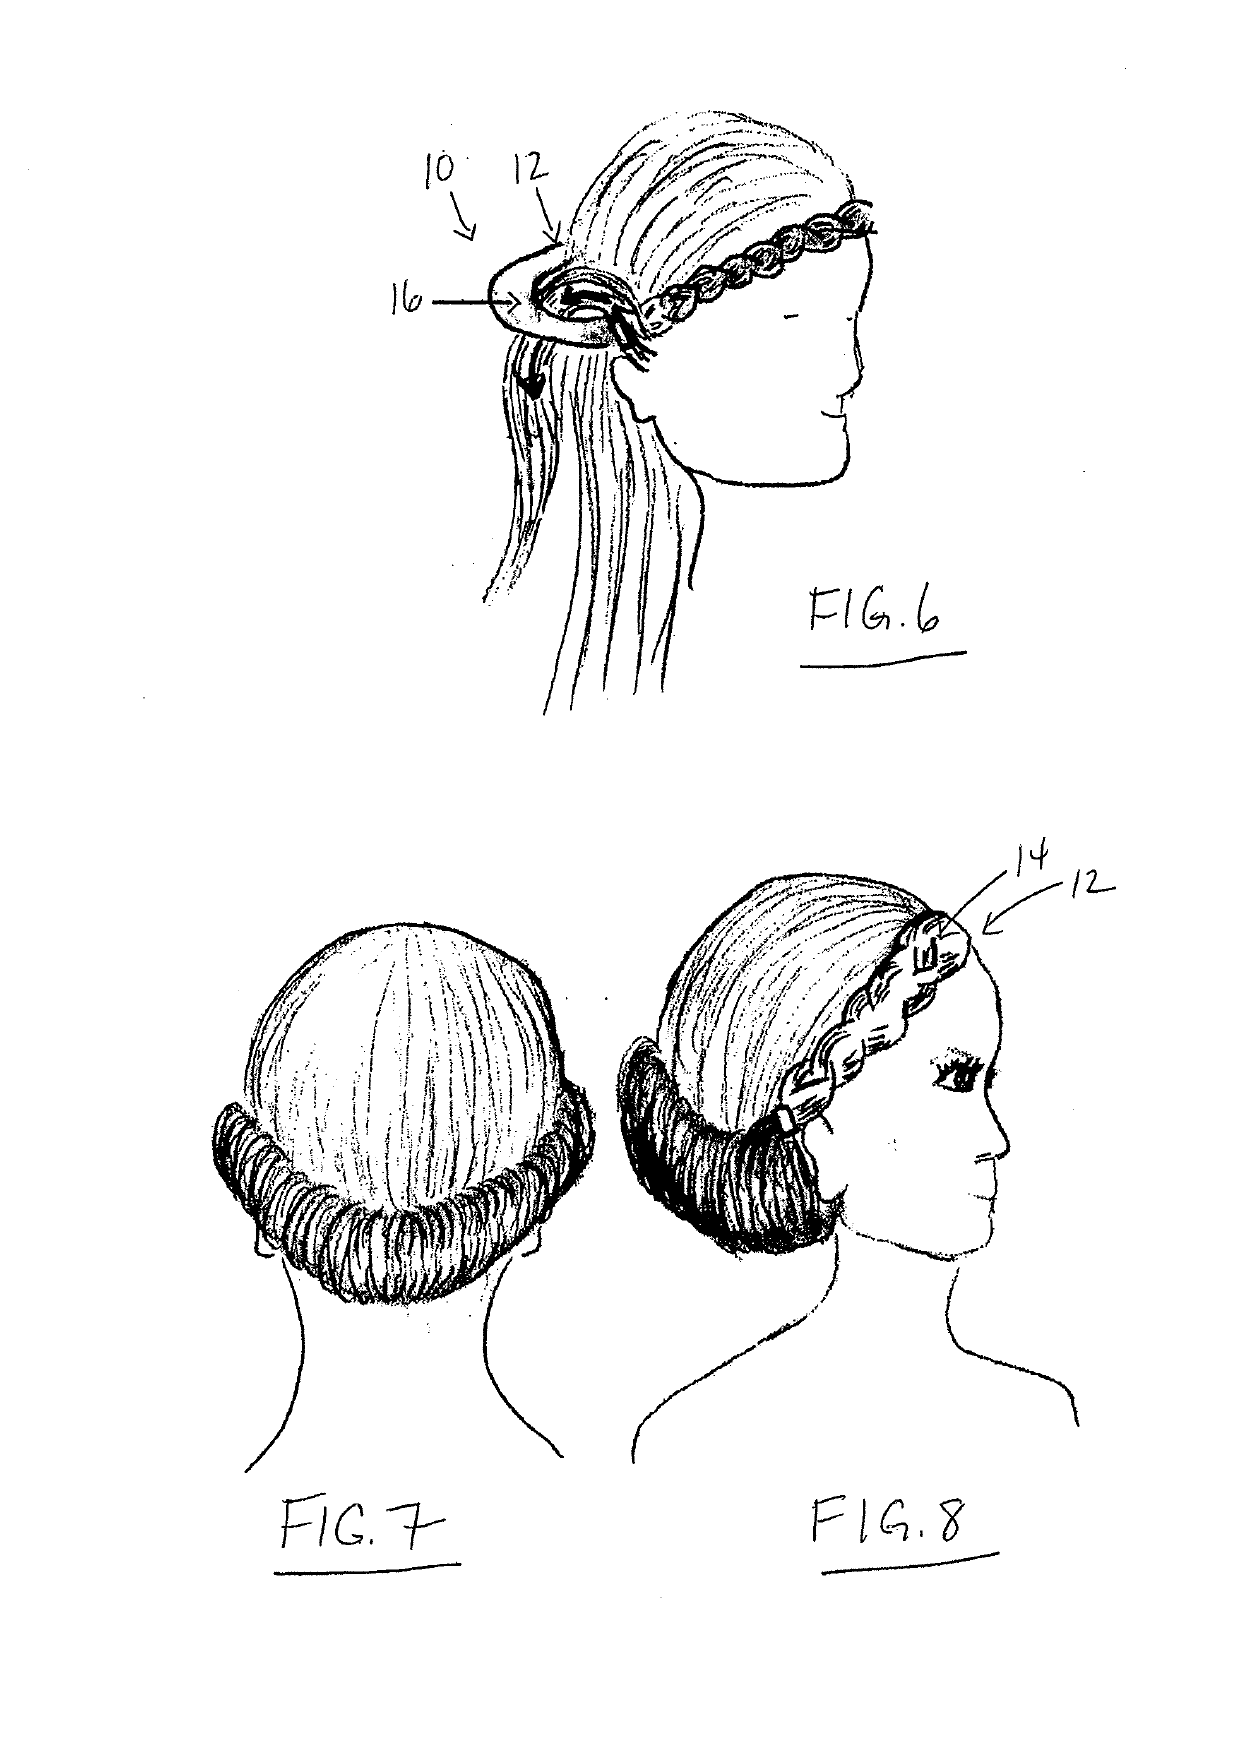 Hair Styling Device Imparting an Updo Hairstyle When Worn and a Different Curled or Straightened Hairstyle When Removed